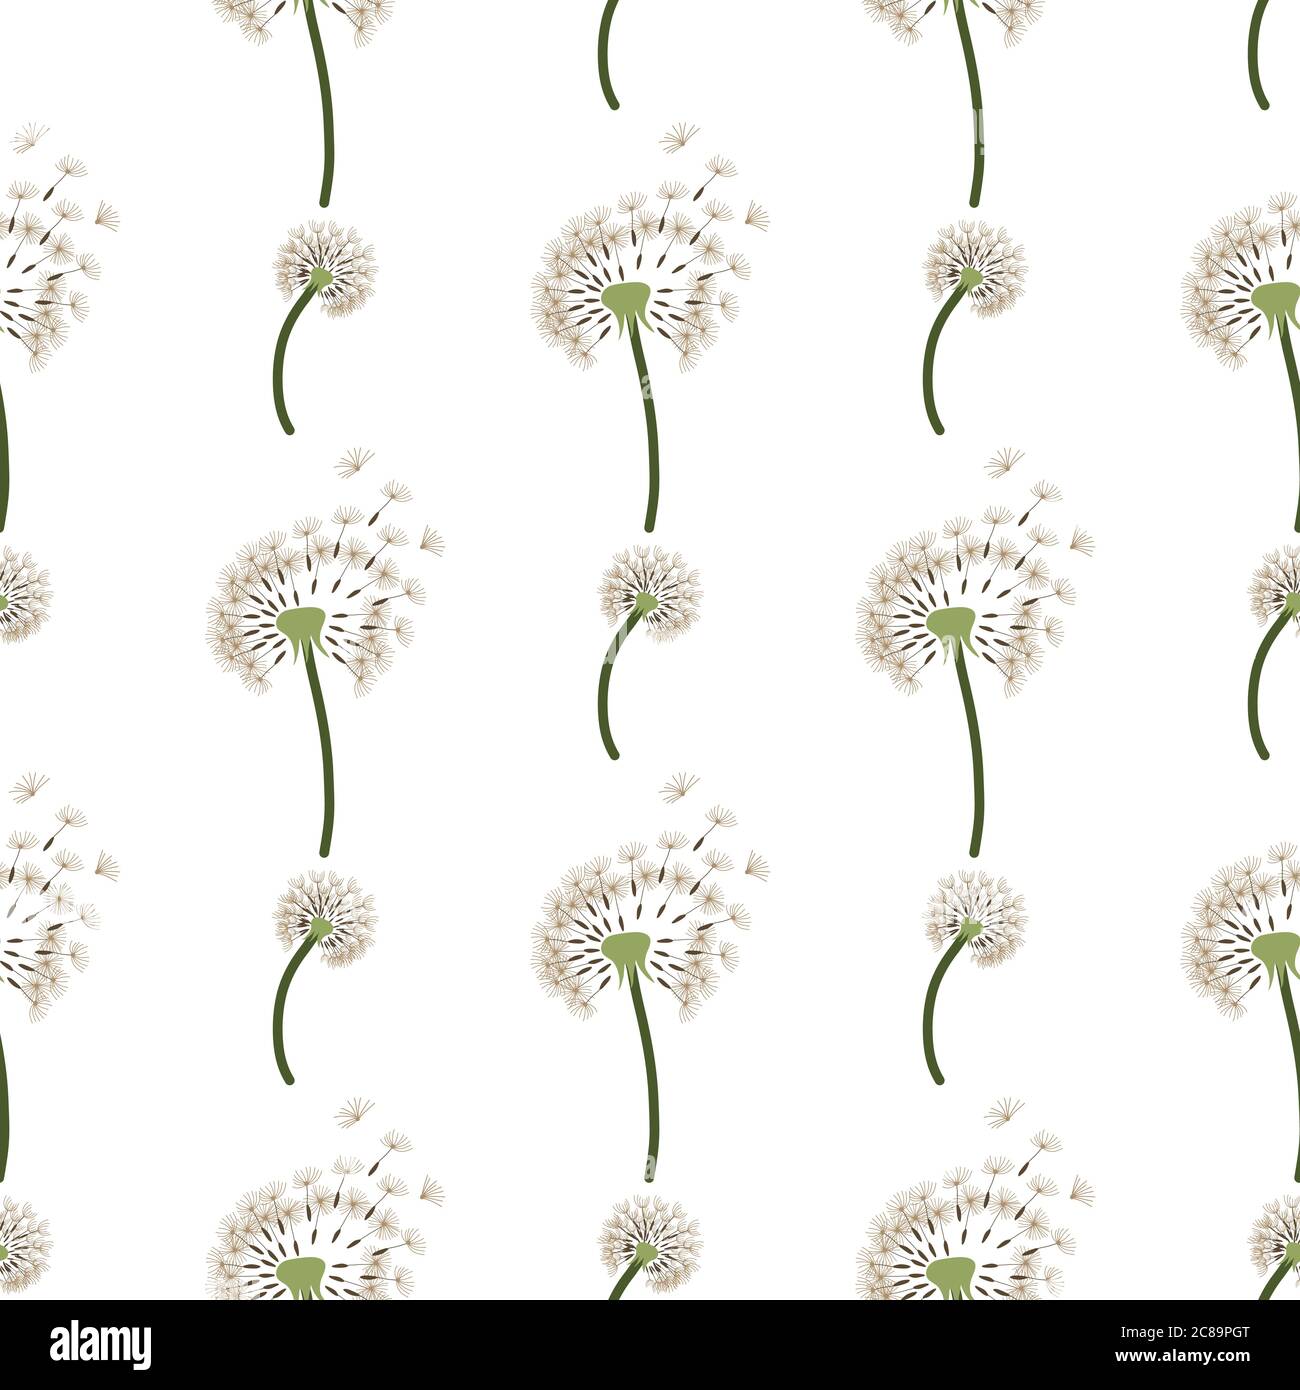 Flying dandelion seed seamless pattern, great design for fabric, wallpaper, background. Vector repeated texture. Stock Vector